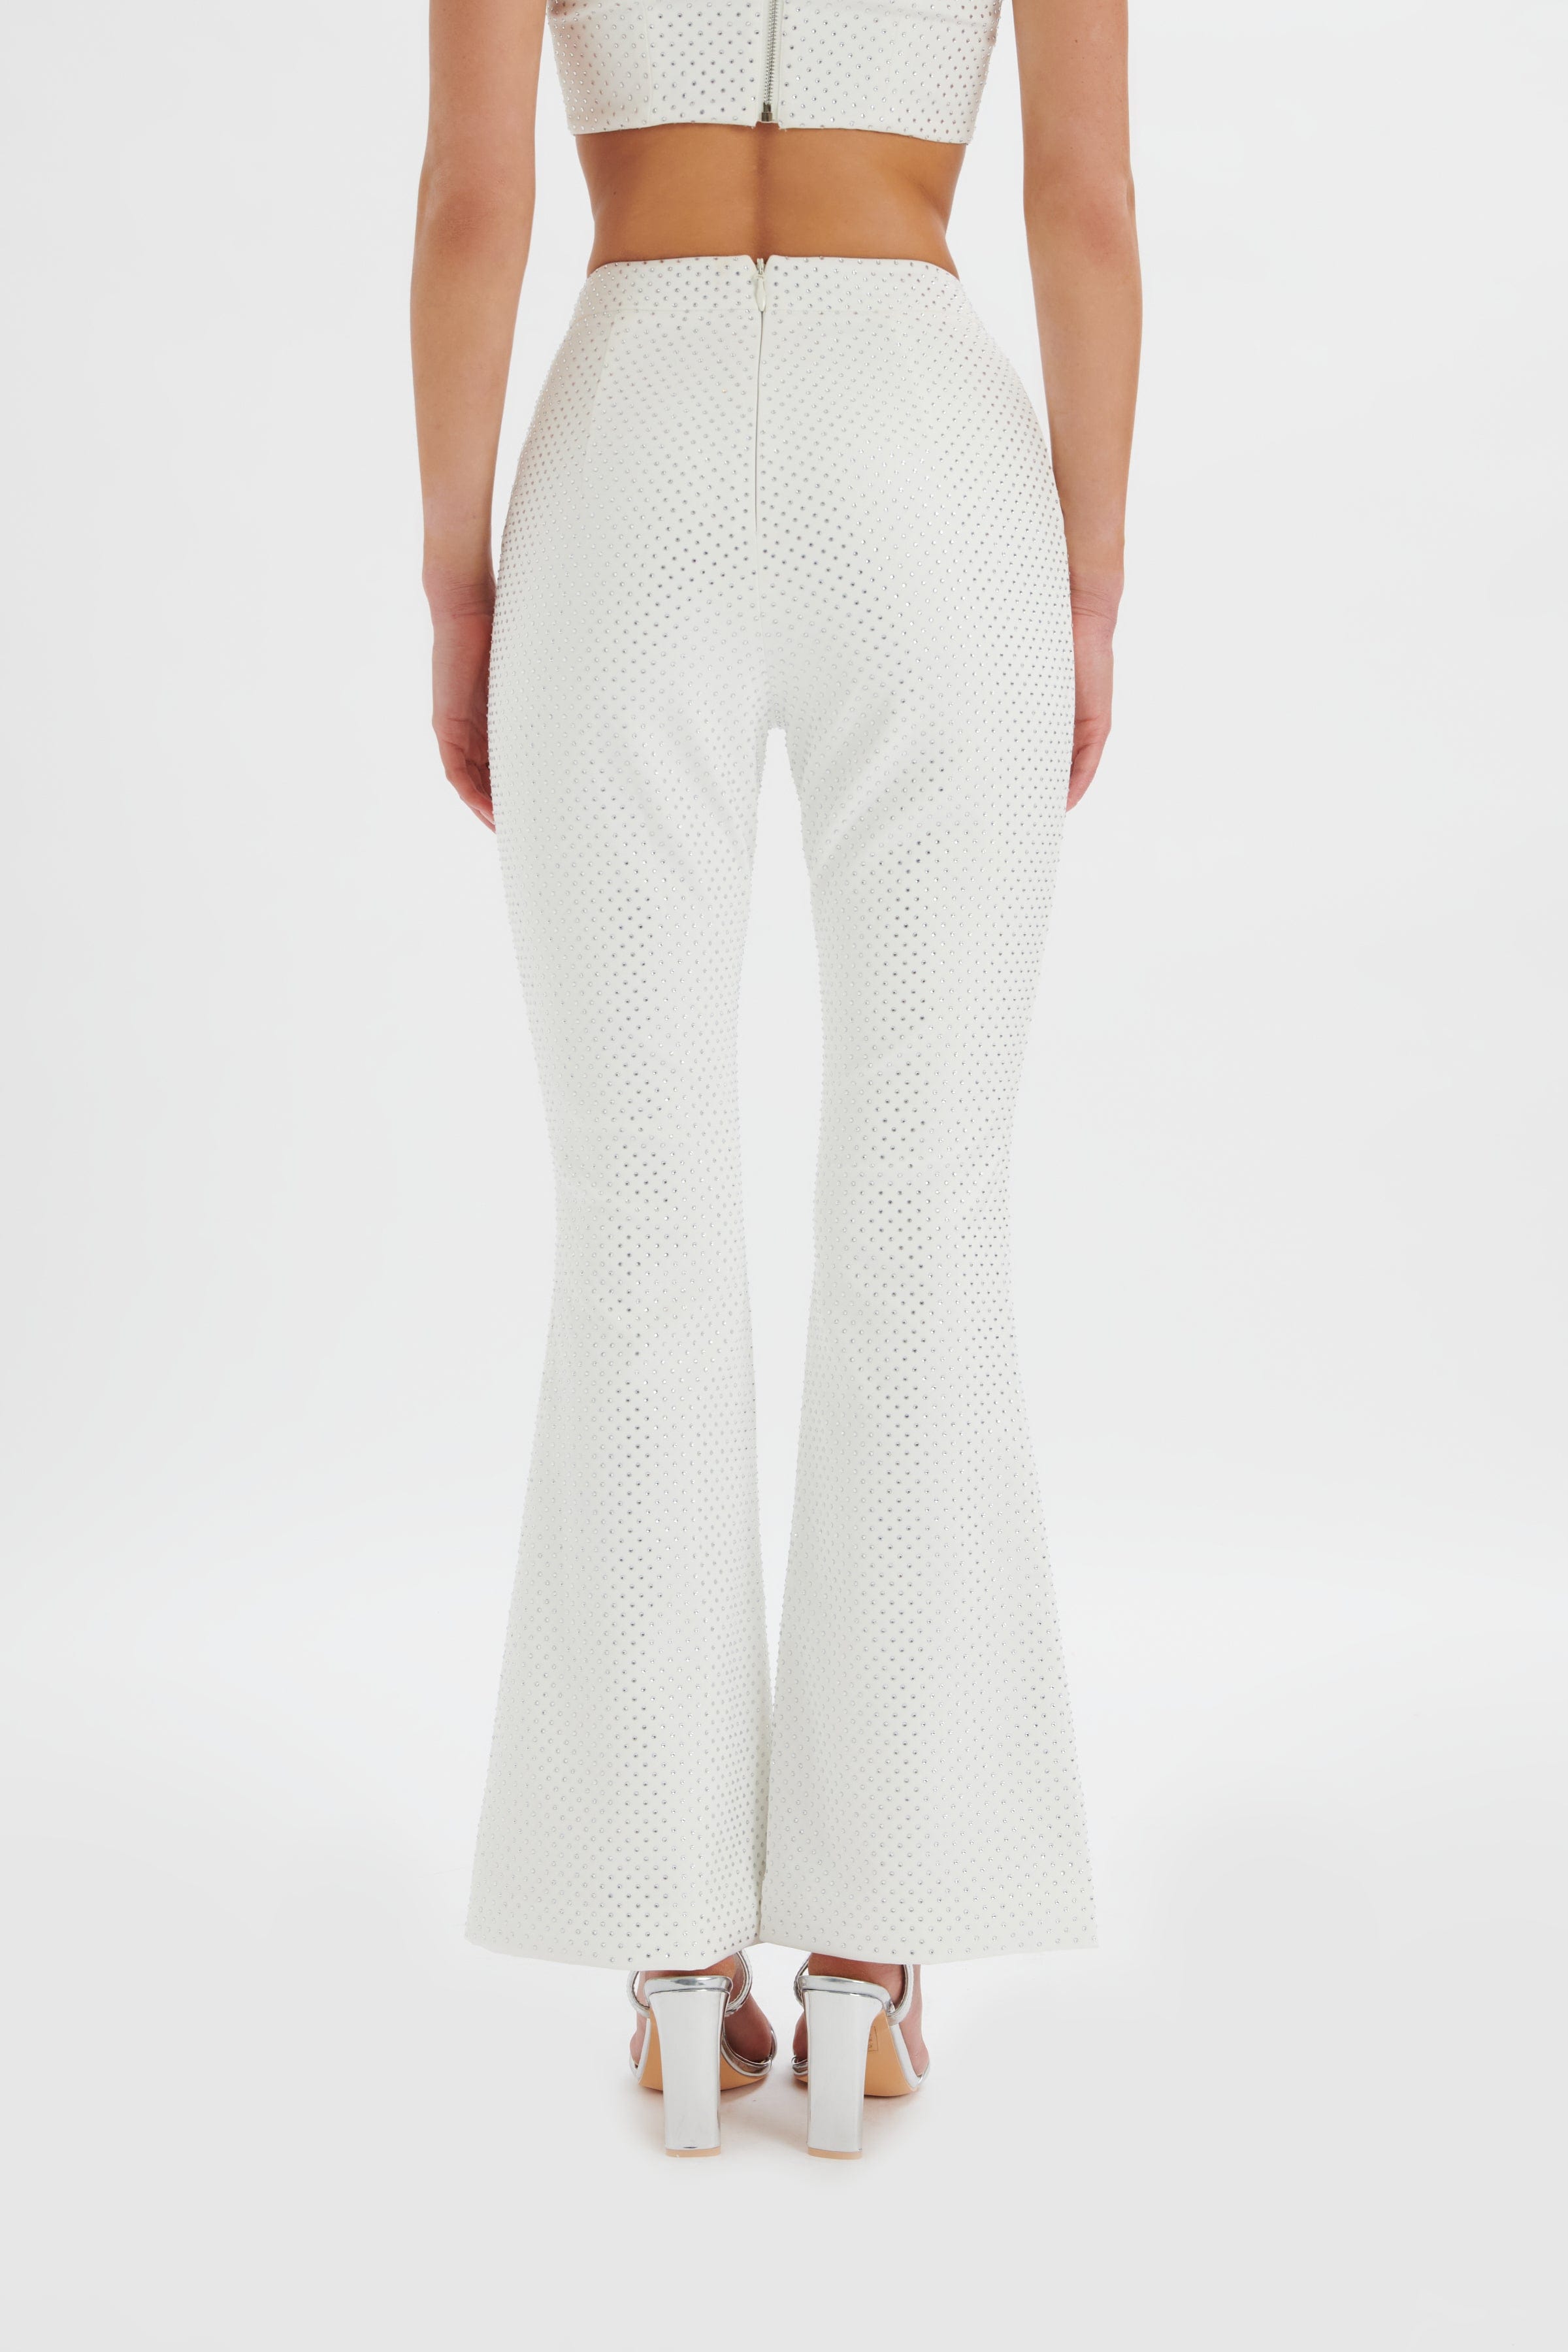 ELLISA Crystal Embellished Fit and Flare Trouser in White